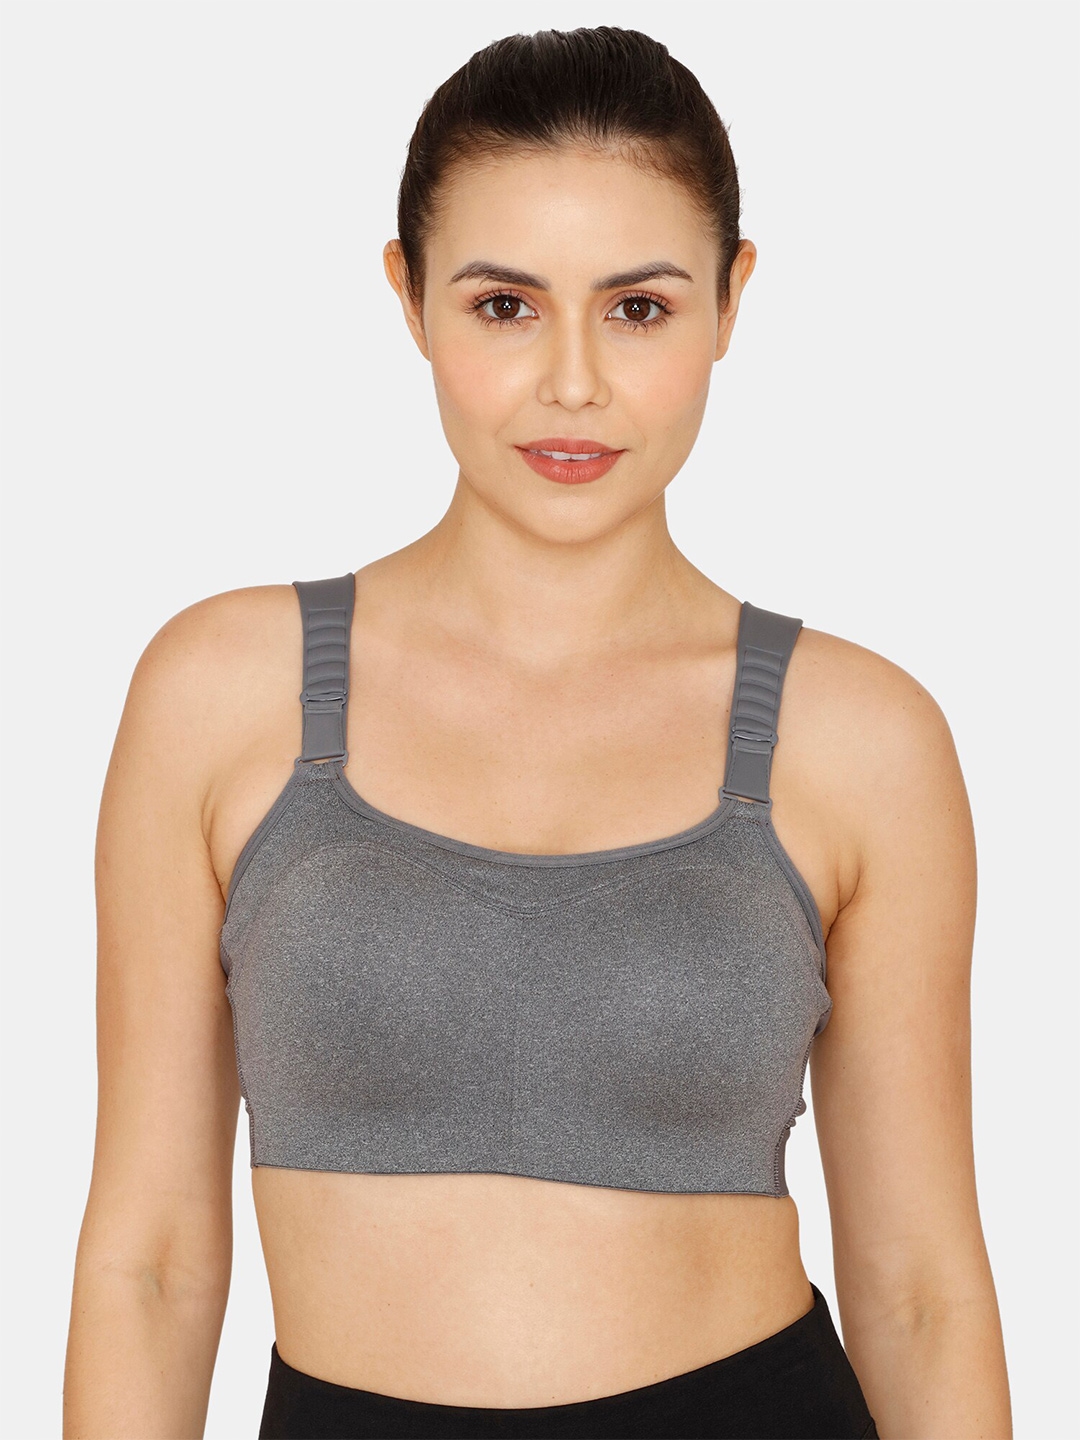 sports bra vs normal bra - everything you need to know – aastey